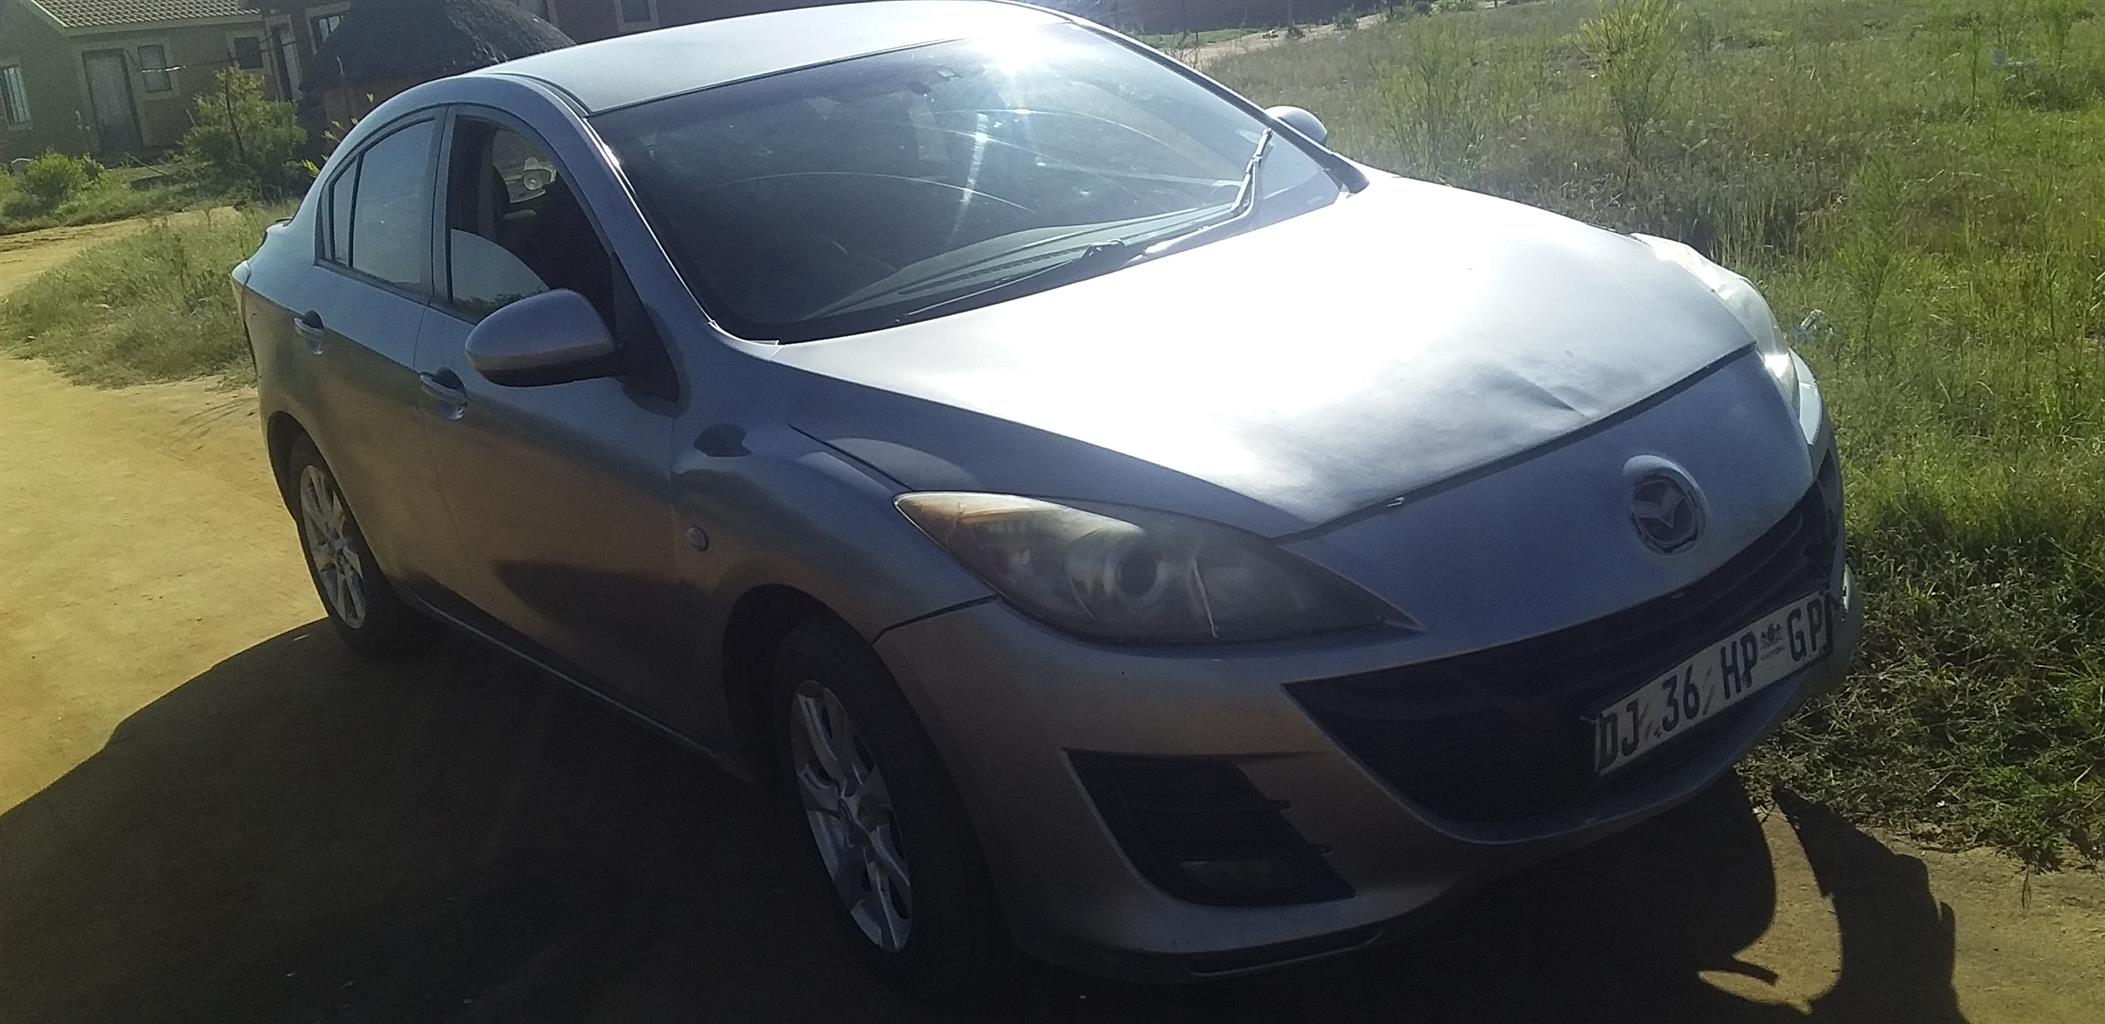 2007 mazda3, needs minor attention on body but engine is 100 good, 1st kick sta